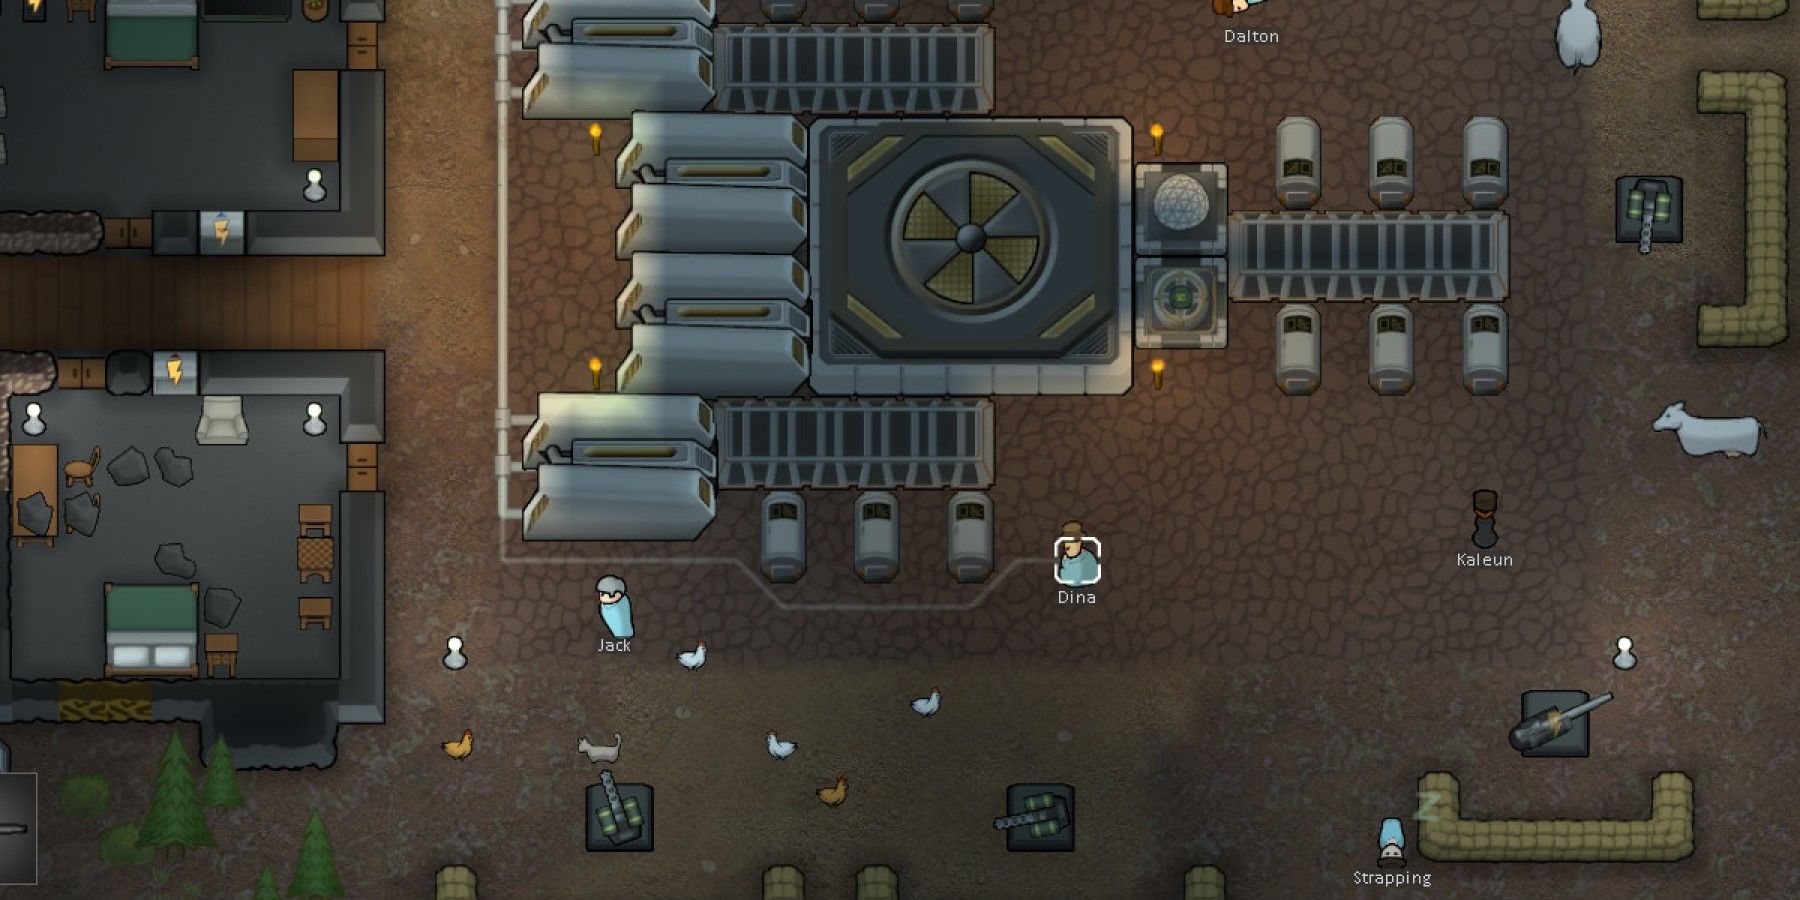 rimworld how to feed animals in pen